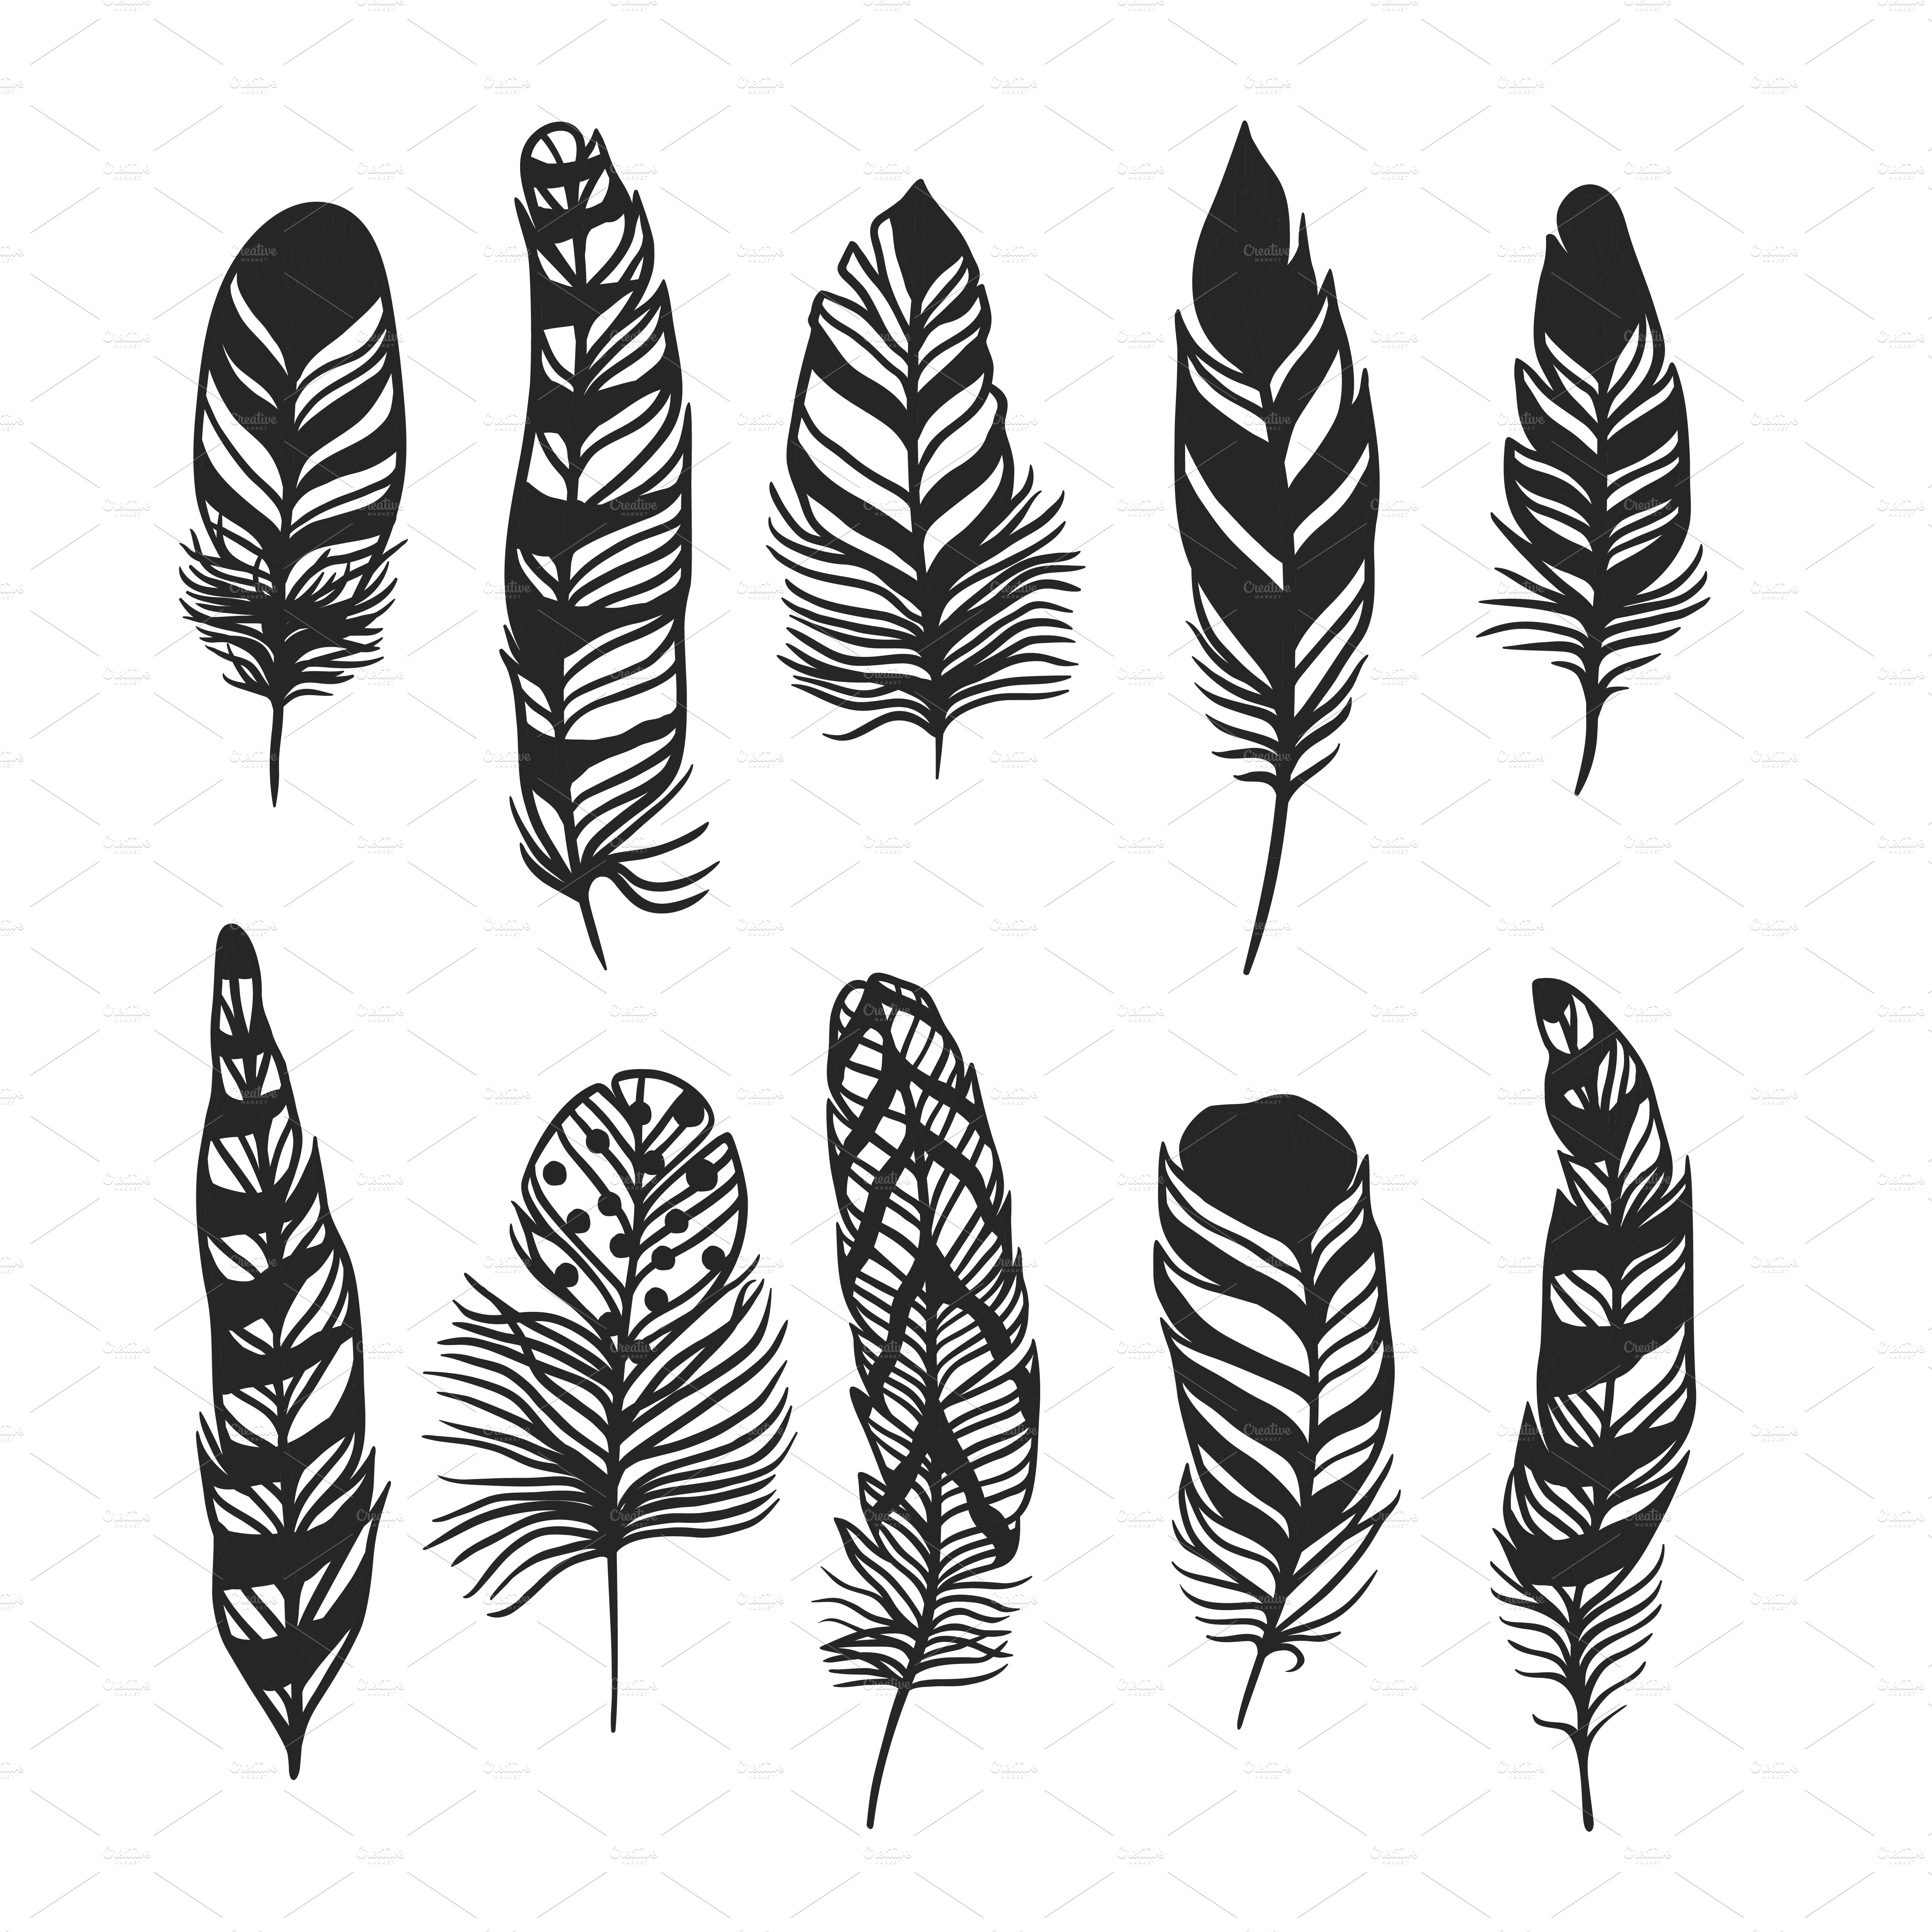 Download Boho feather hand drawn vector | Custom-Designed ...